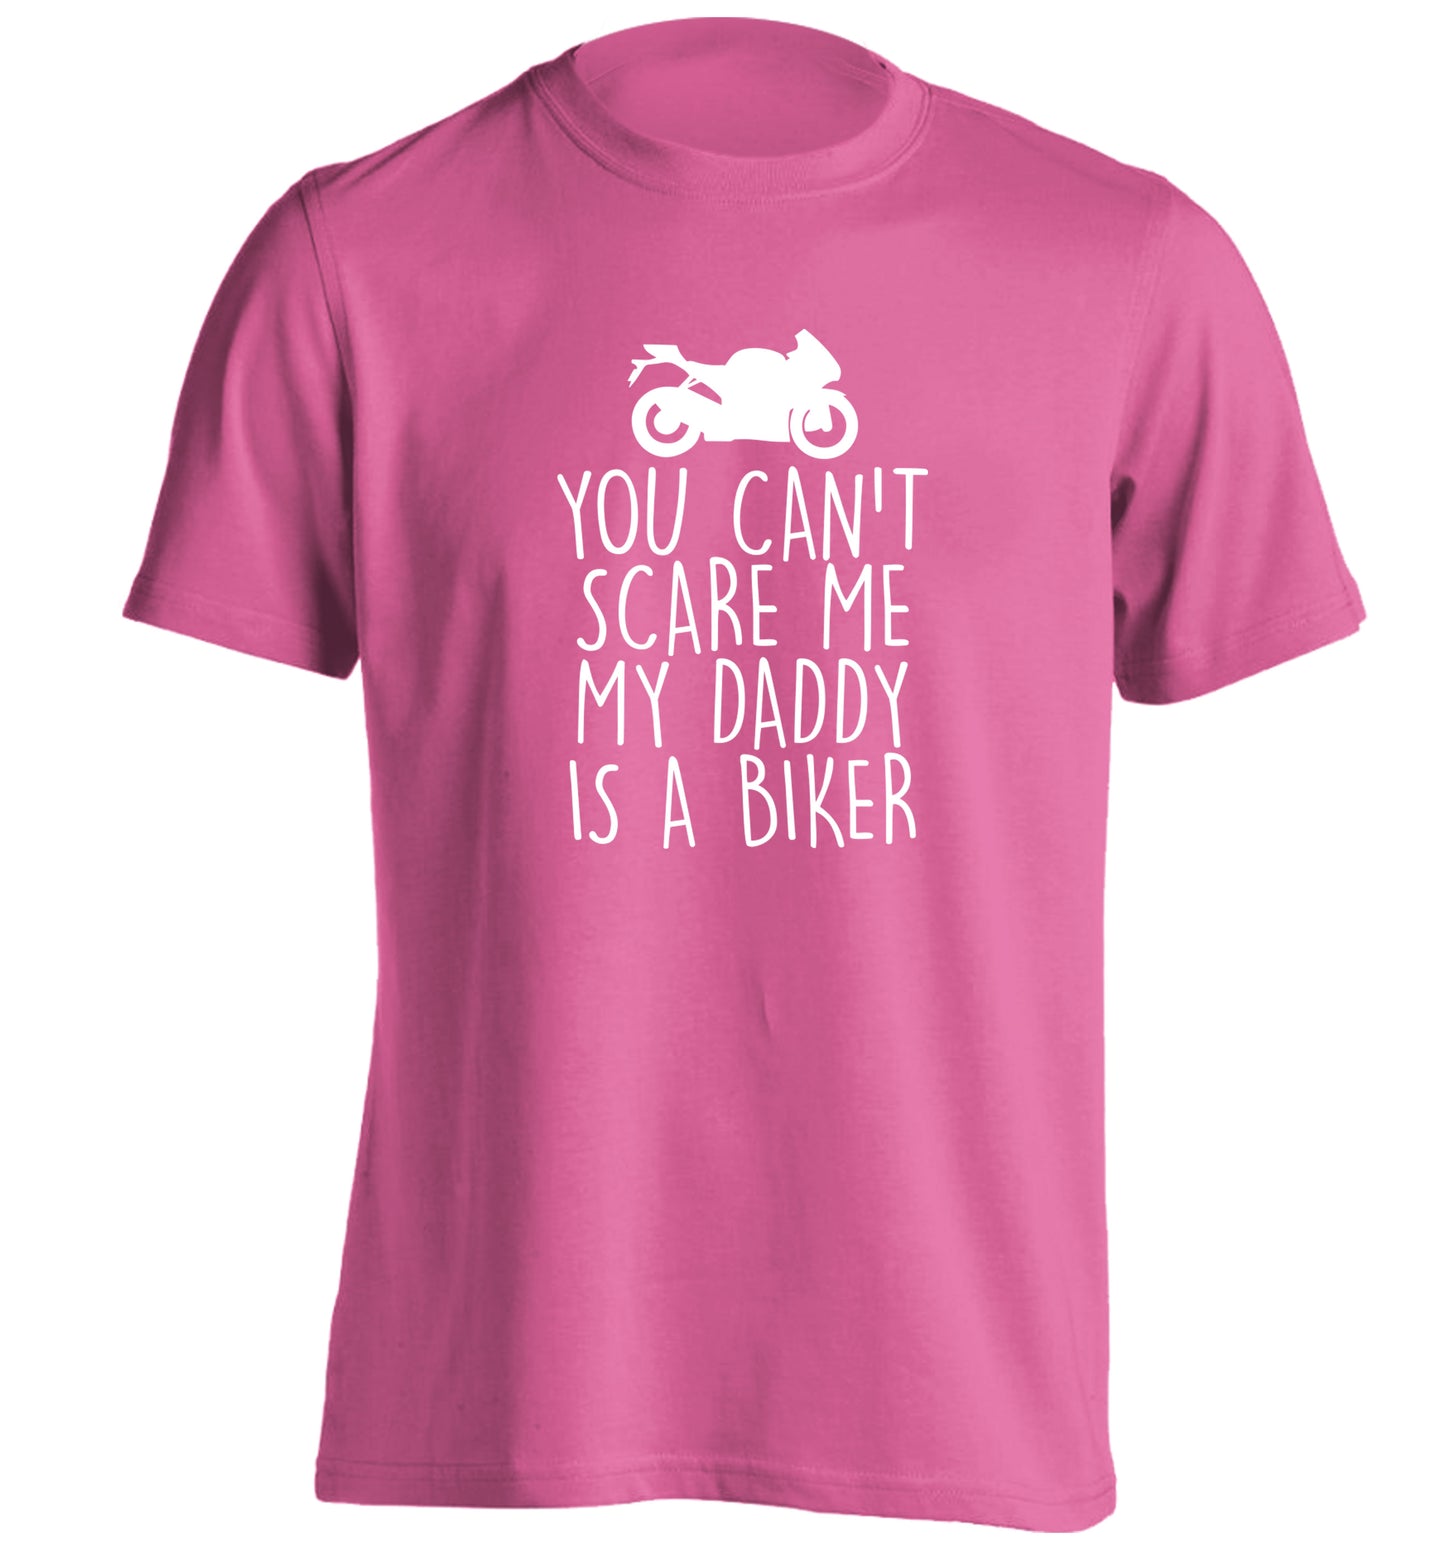 You can't scare me my daddy is a biker adults unisex pink Tshirt 2XL